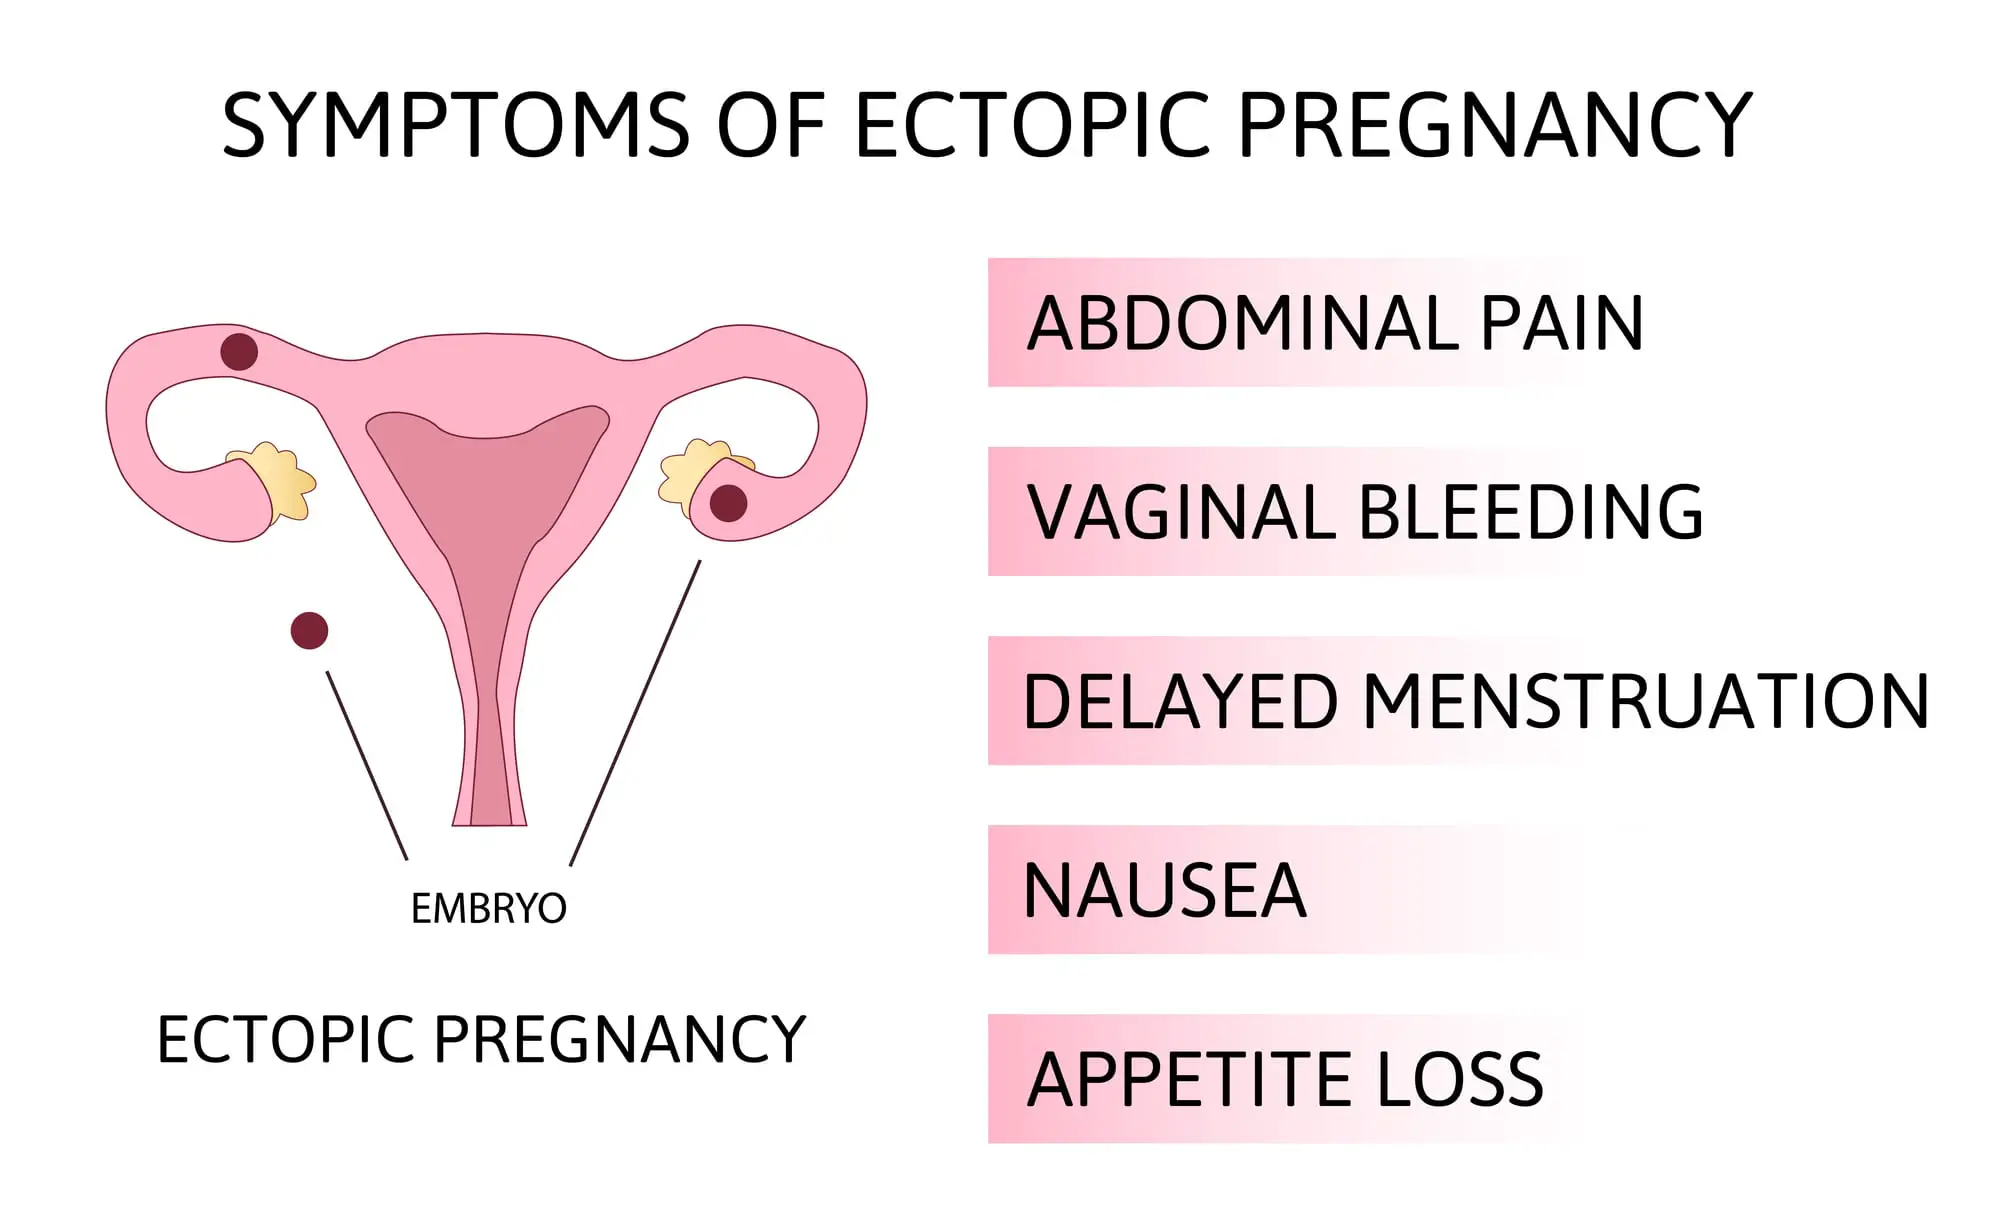 Signs of an Ectopic Pregnancy